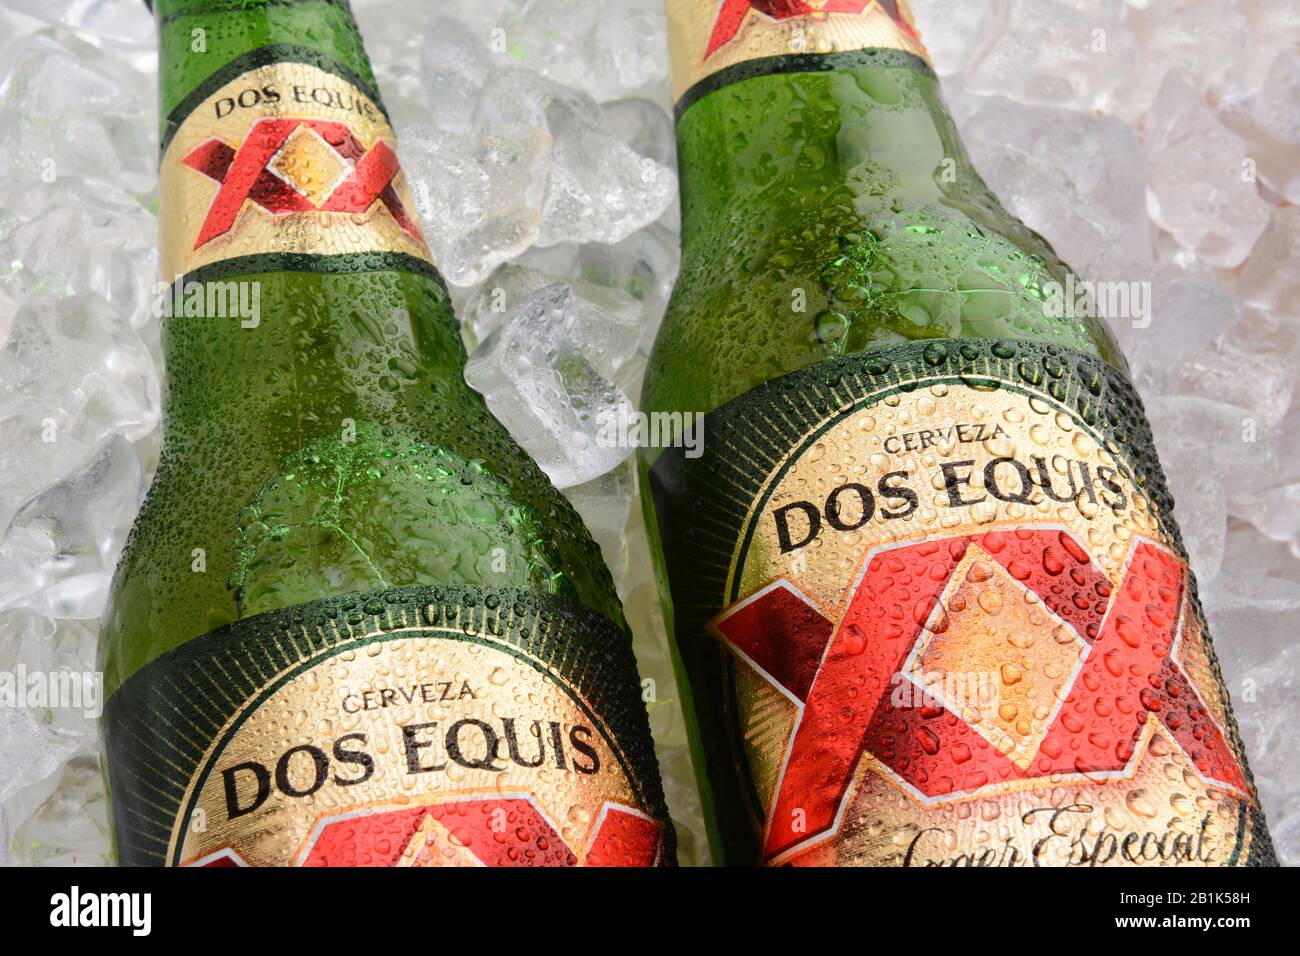 IRVINE, CA - MAY 25, 2014: Two Bottles of Dos Equis Lager Especial on a bed of ice. Founded in 1890 from the Cuauhtemoc-Moctezuma Brewery in Monterrey Stock Photo